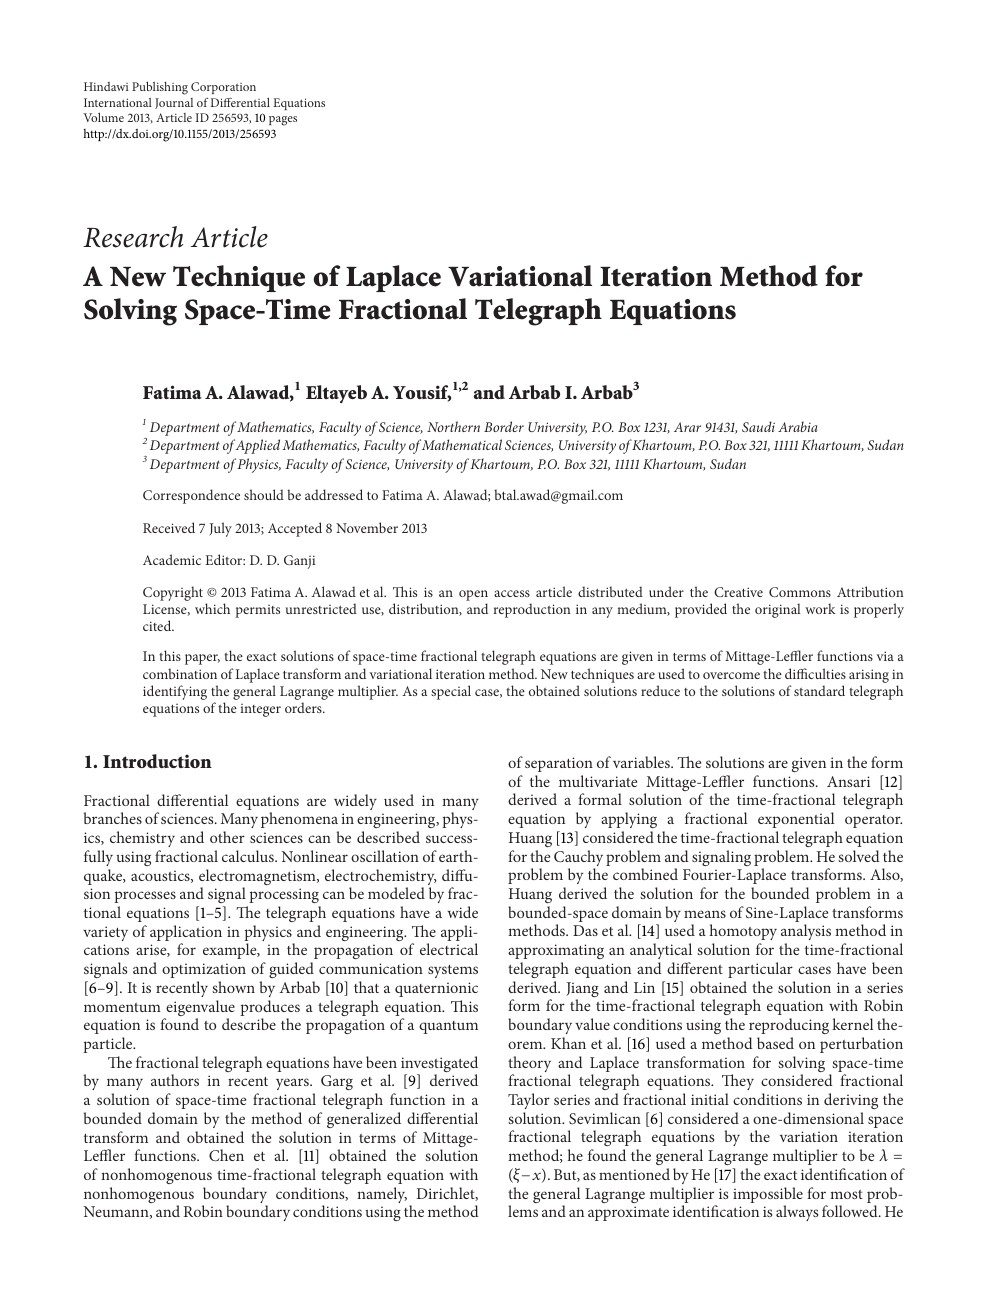 A New Technique Of Laplace Variational Iteration Method For Solving Space Time Fractional Telegraph Equations Topic Of Research Paper In Mathematics Download Scholarly Article Pdf And Read For Free On Cyberleninka Open